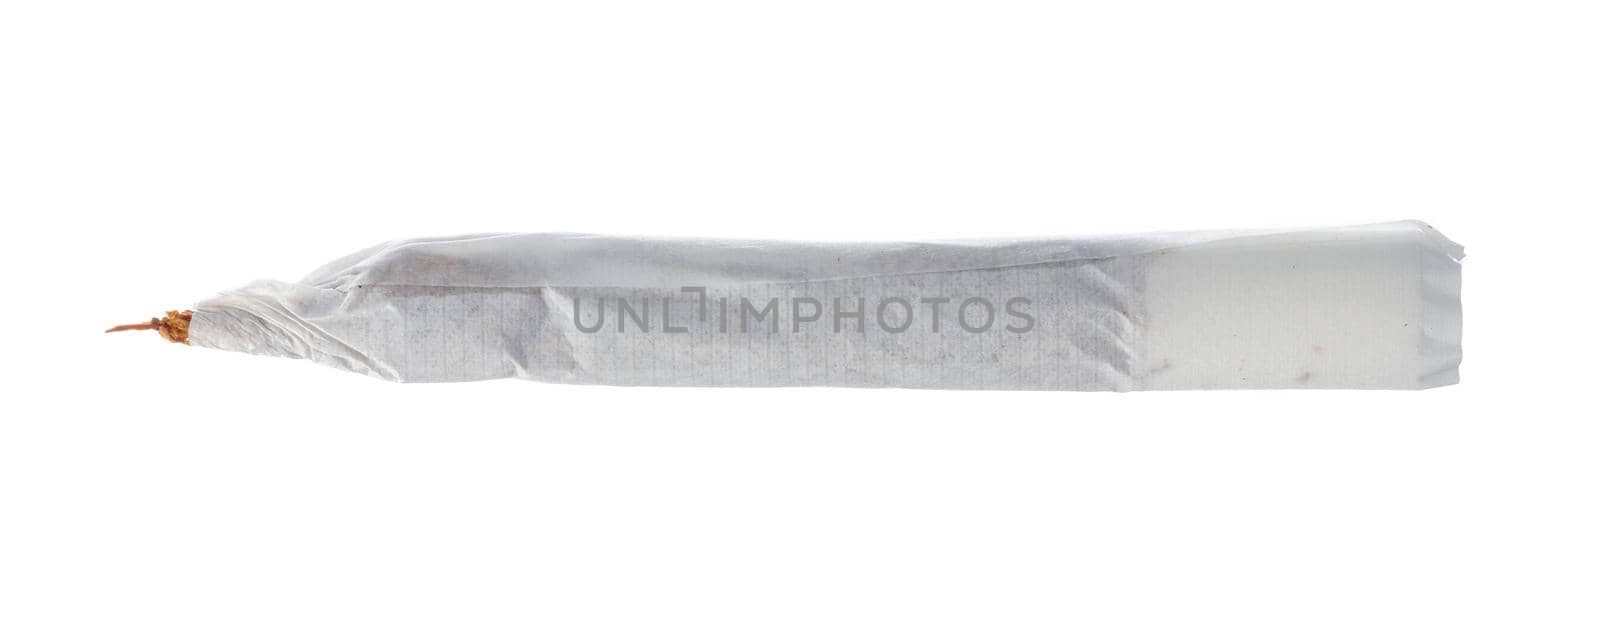 One unlit cigarette isolated on white background close up